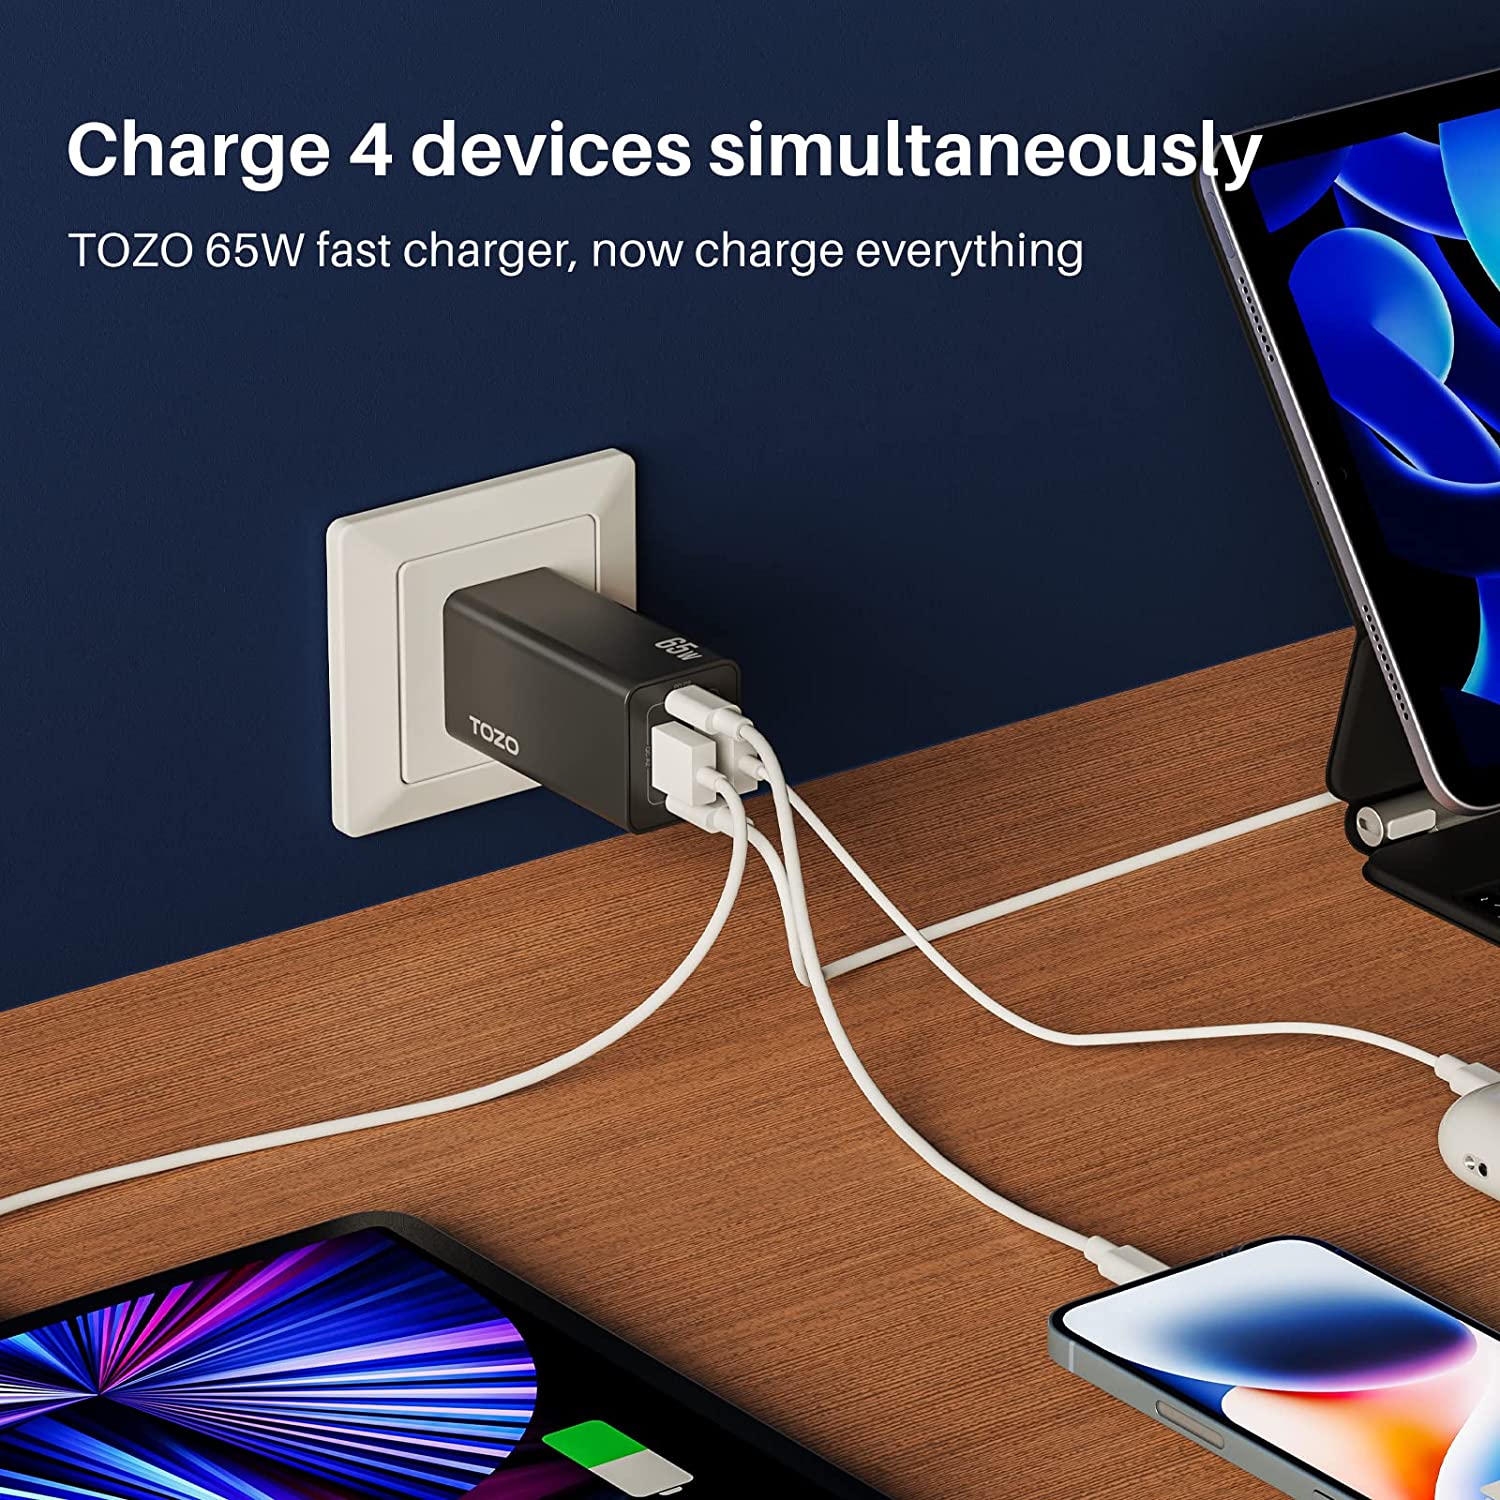 Tozo C2 65W USB-C 4 Port PD and QC Wall Charger Power Adapter - Black - Pro-Distributing